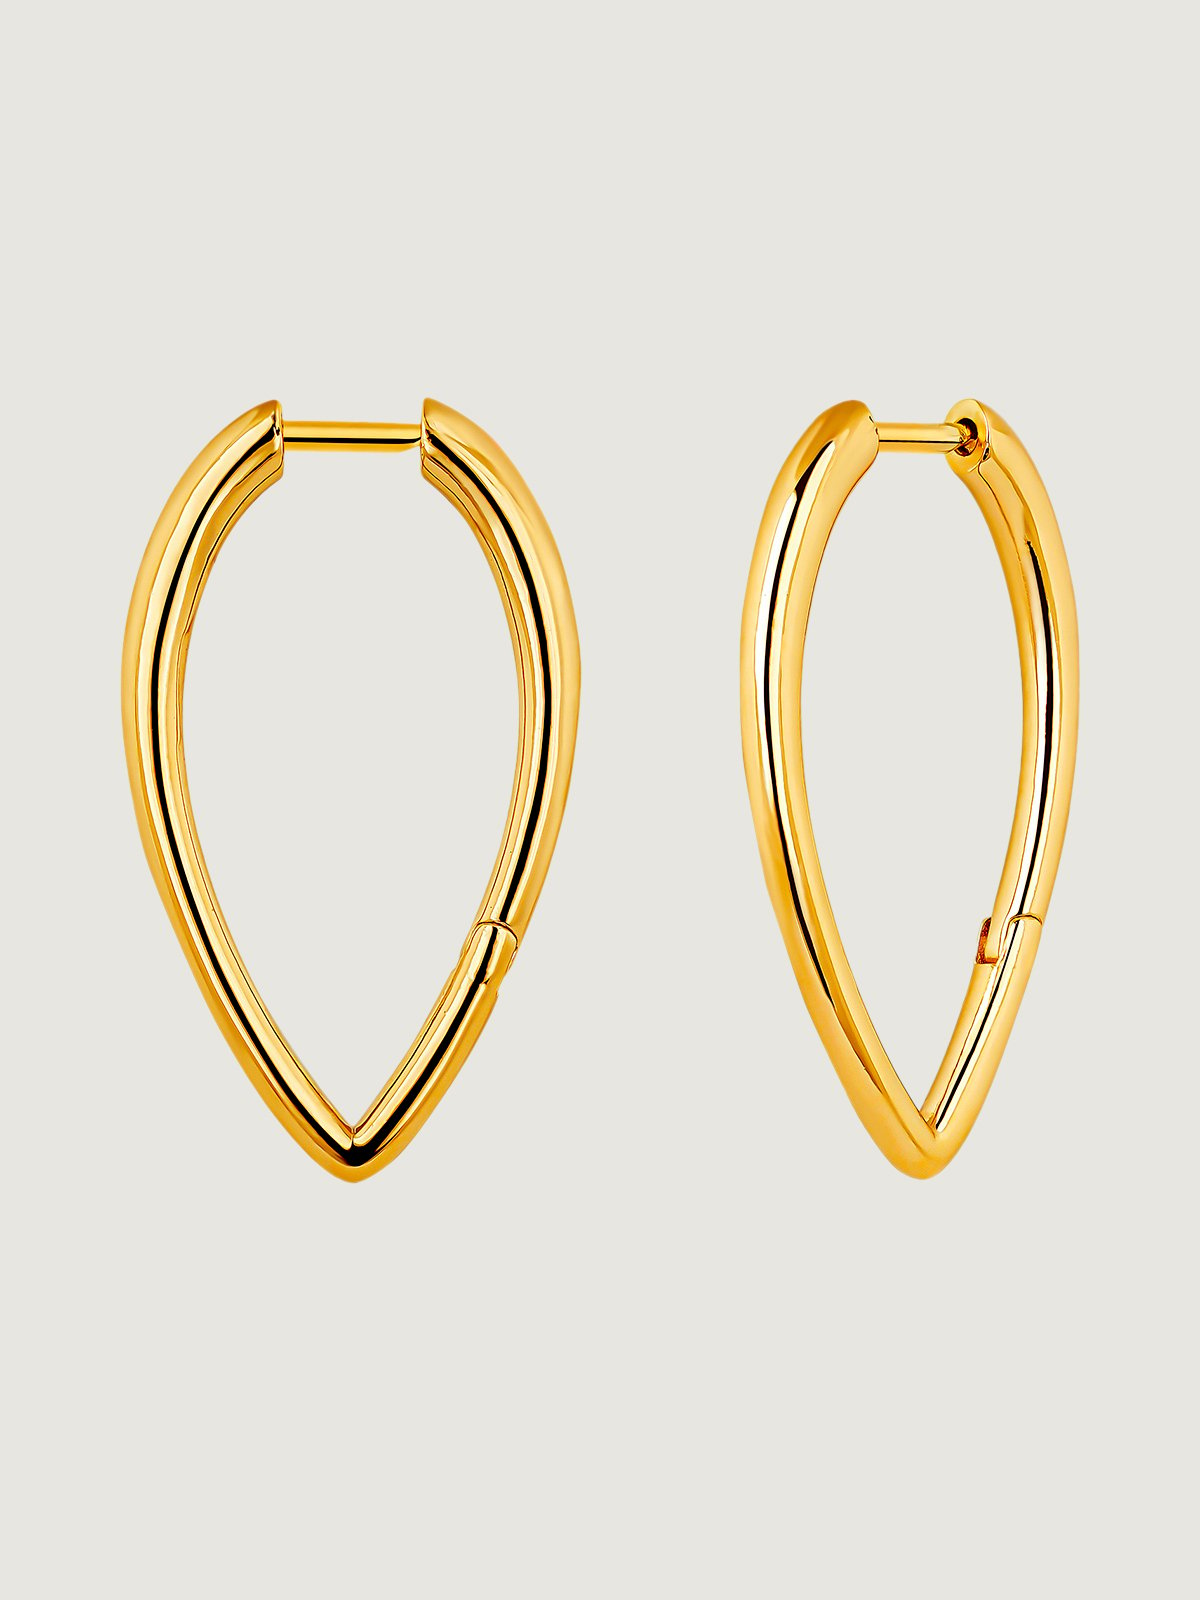 Large hoop earrings made of 925 silver, bathed in 18K yellow gold, with a drop shape.